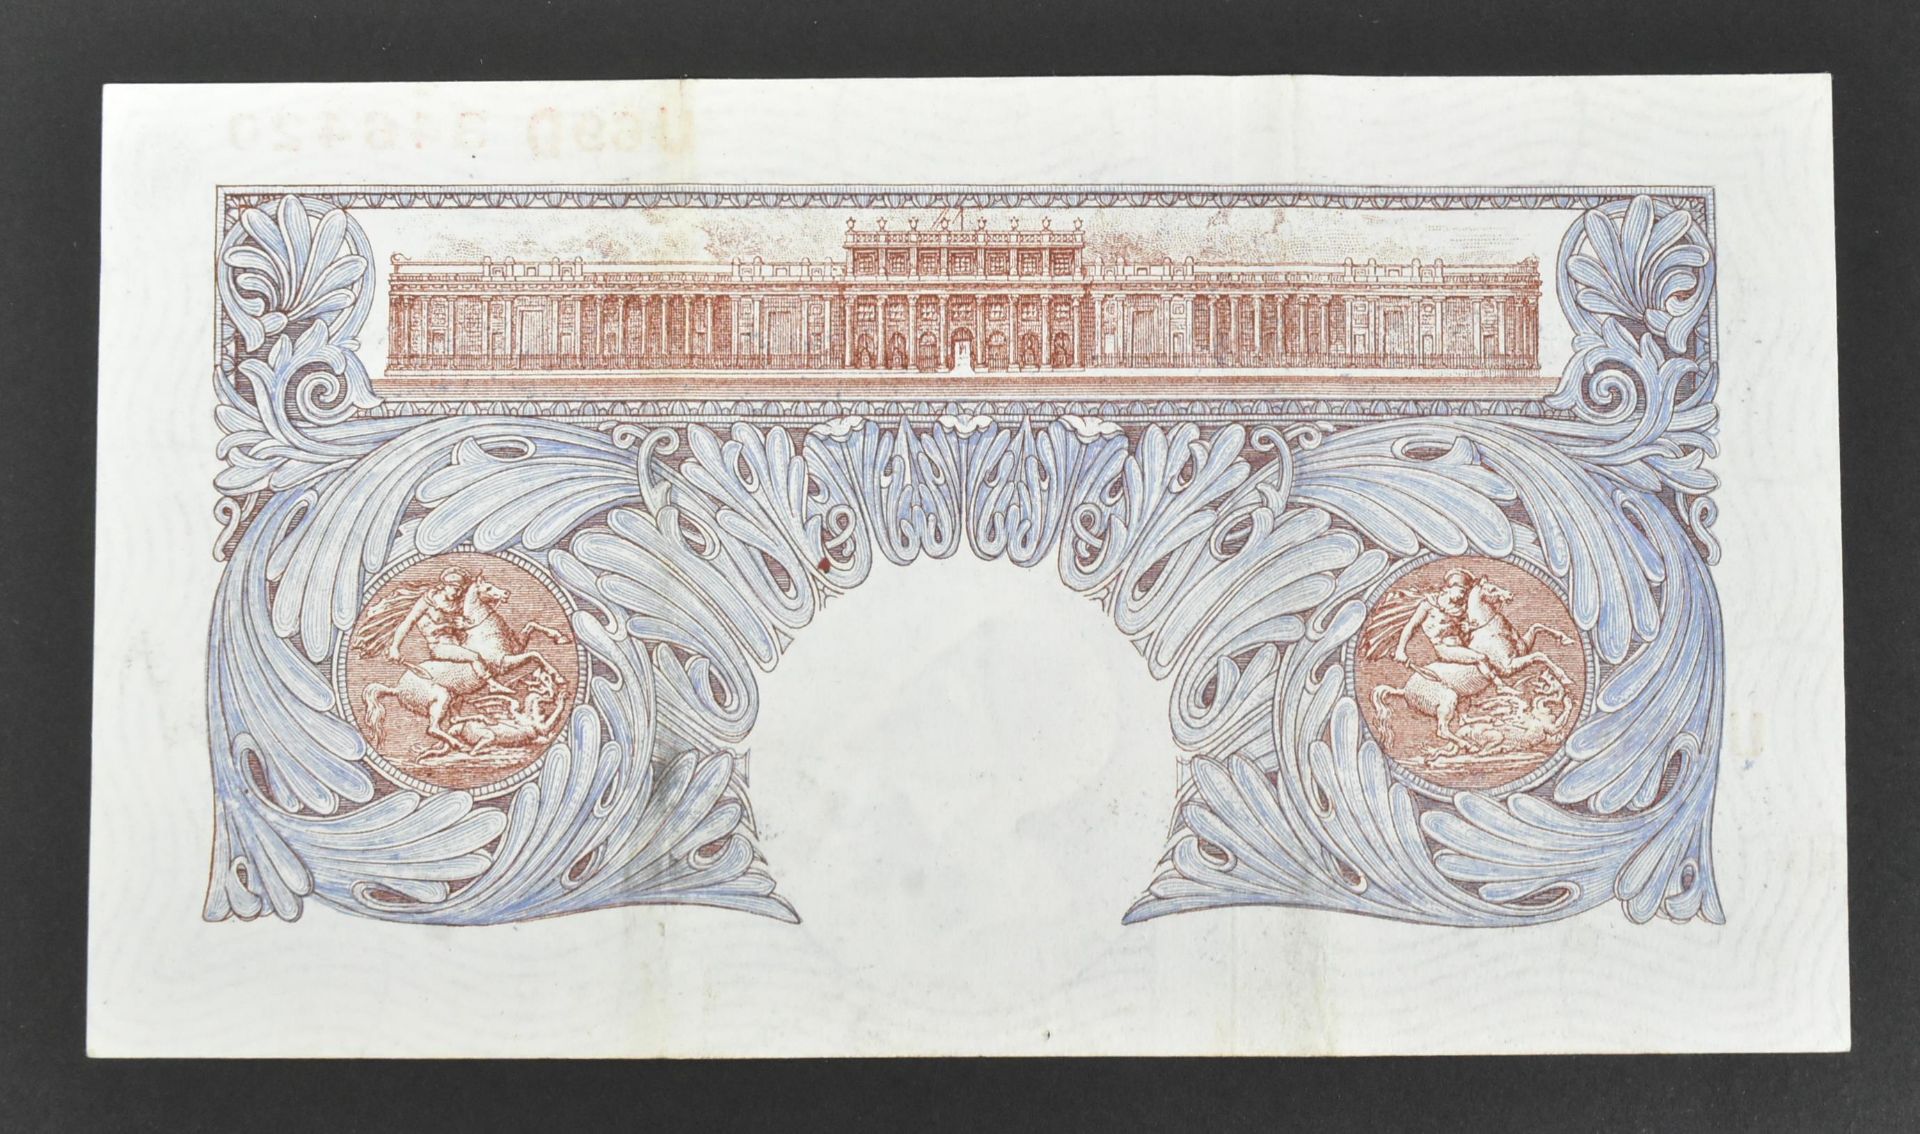 COLLECTION BRITISH UNCIRCULATED BANK NOTES - Image 47 of 61